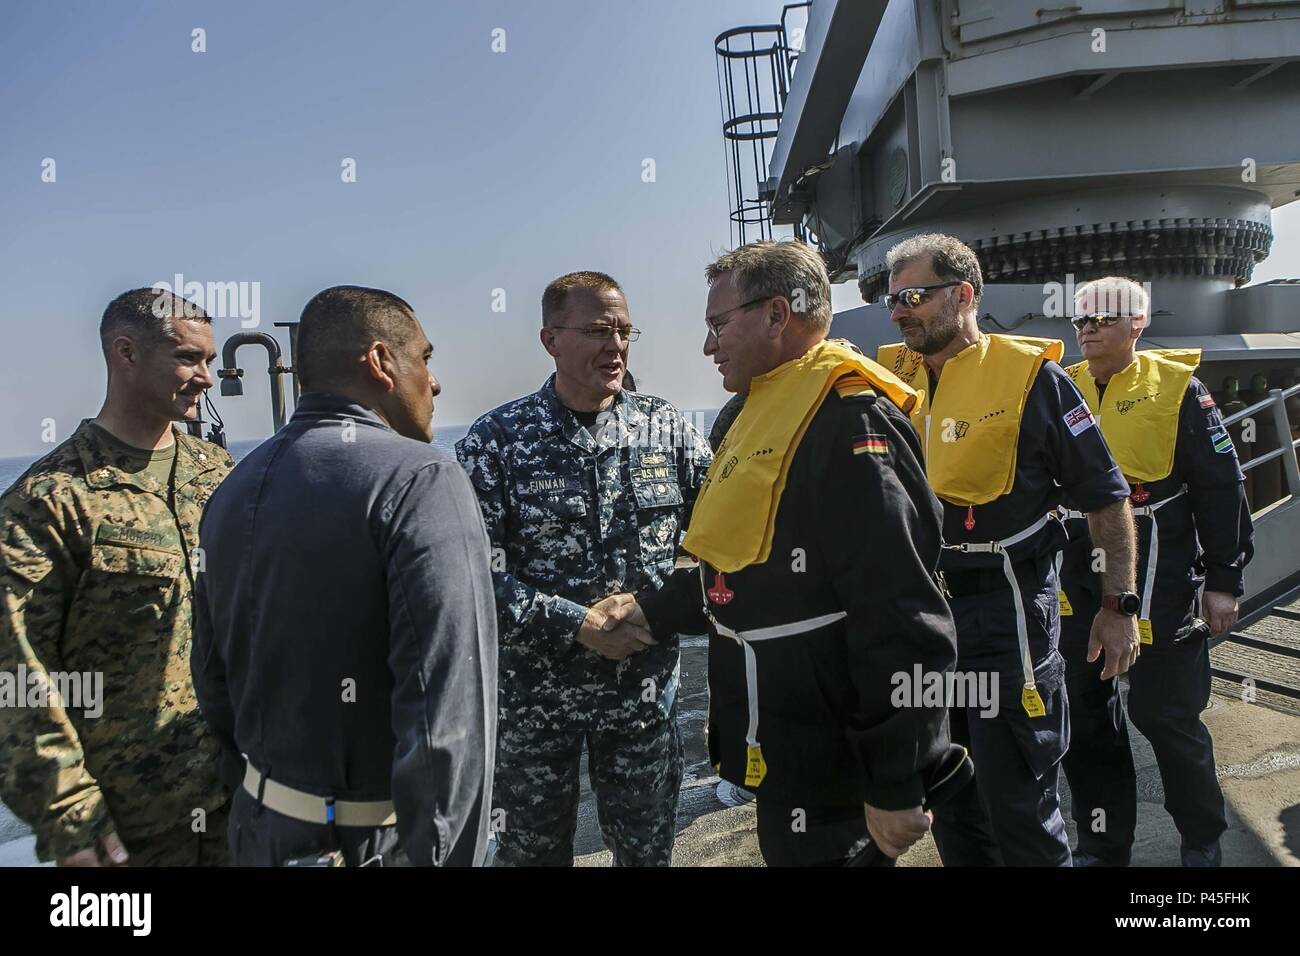 BALTIC SEA (June 04, 2018) Capt. Brian J. Finman, center, deputy commodore of Amphibious Squadron 4, U.S. Marine Corps Maj. Joseph P. Murphy, far left, commander of landing forces for the 26th Marine Expeditionary Unit aboard the Harpers Ferry-class dock landing ship USS Oak Hill (LSD 51), and Cmdr. Rodolfo Jacobo, right, executive officer of the Oak Hill, welcome distinguished visitors aboard the ship during exercise Baltic Operations (BALTOPS) 2018 in the Baltic Sea, June 4, June 4, 2018. BALTOPS is the premier annual maritime-focused exercise in the Baltic region and one of the largest exer Stock Photo